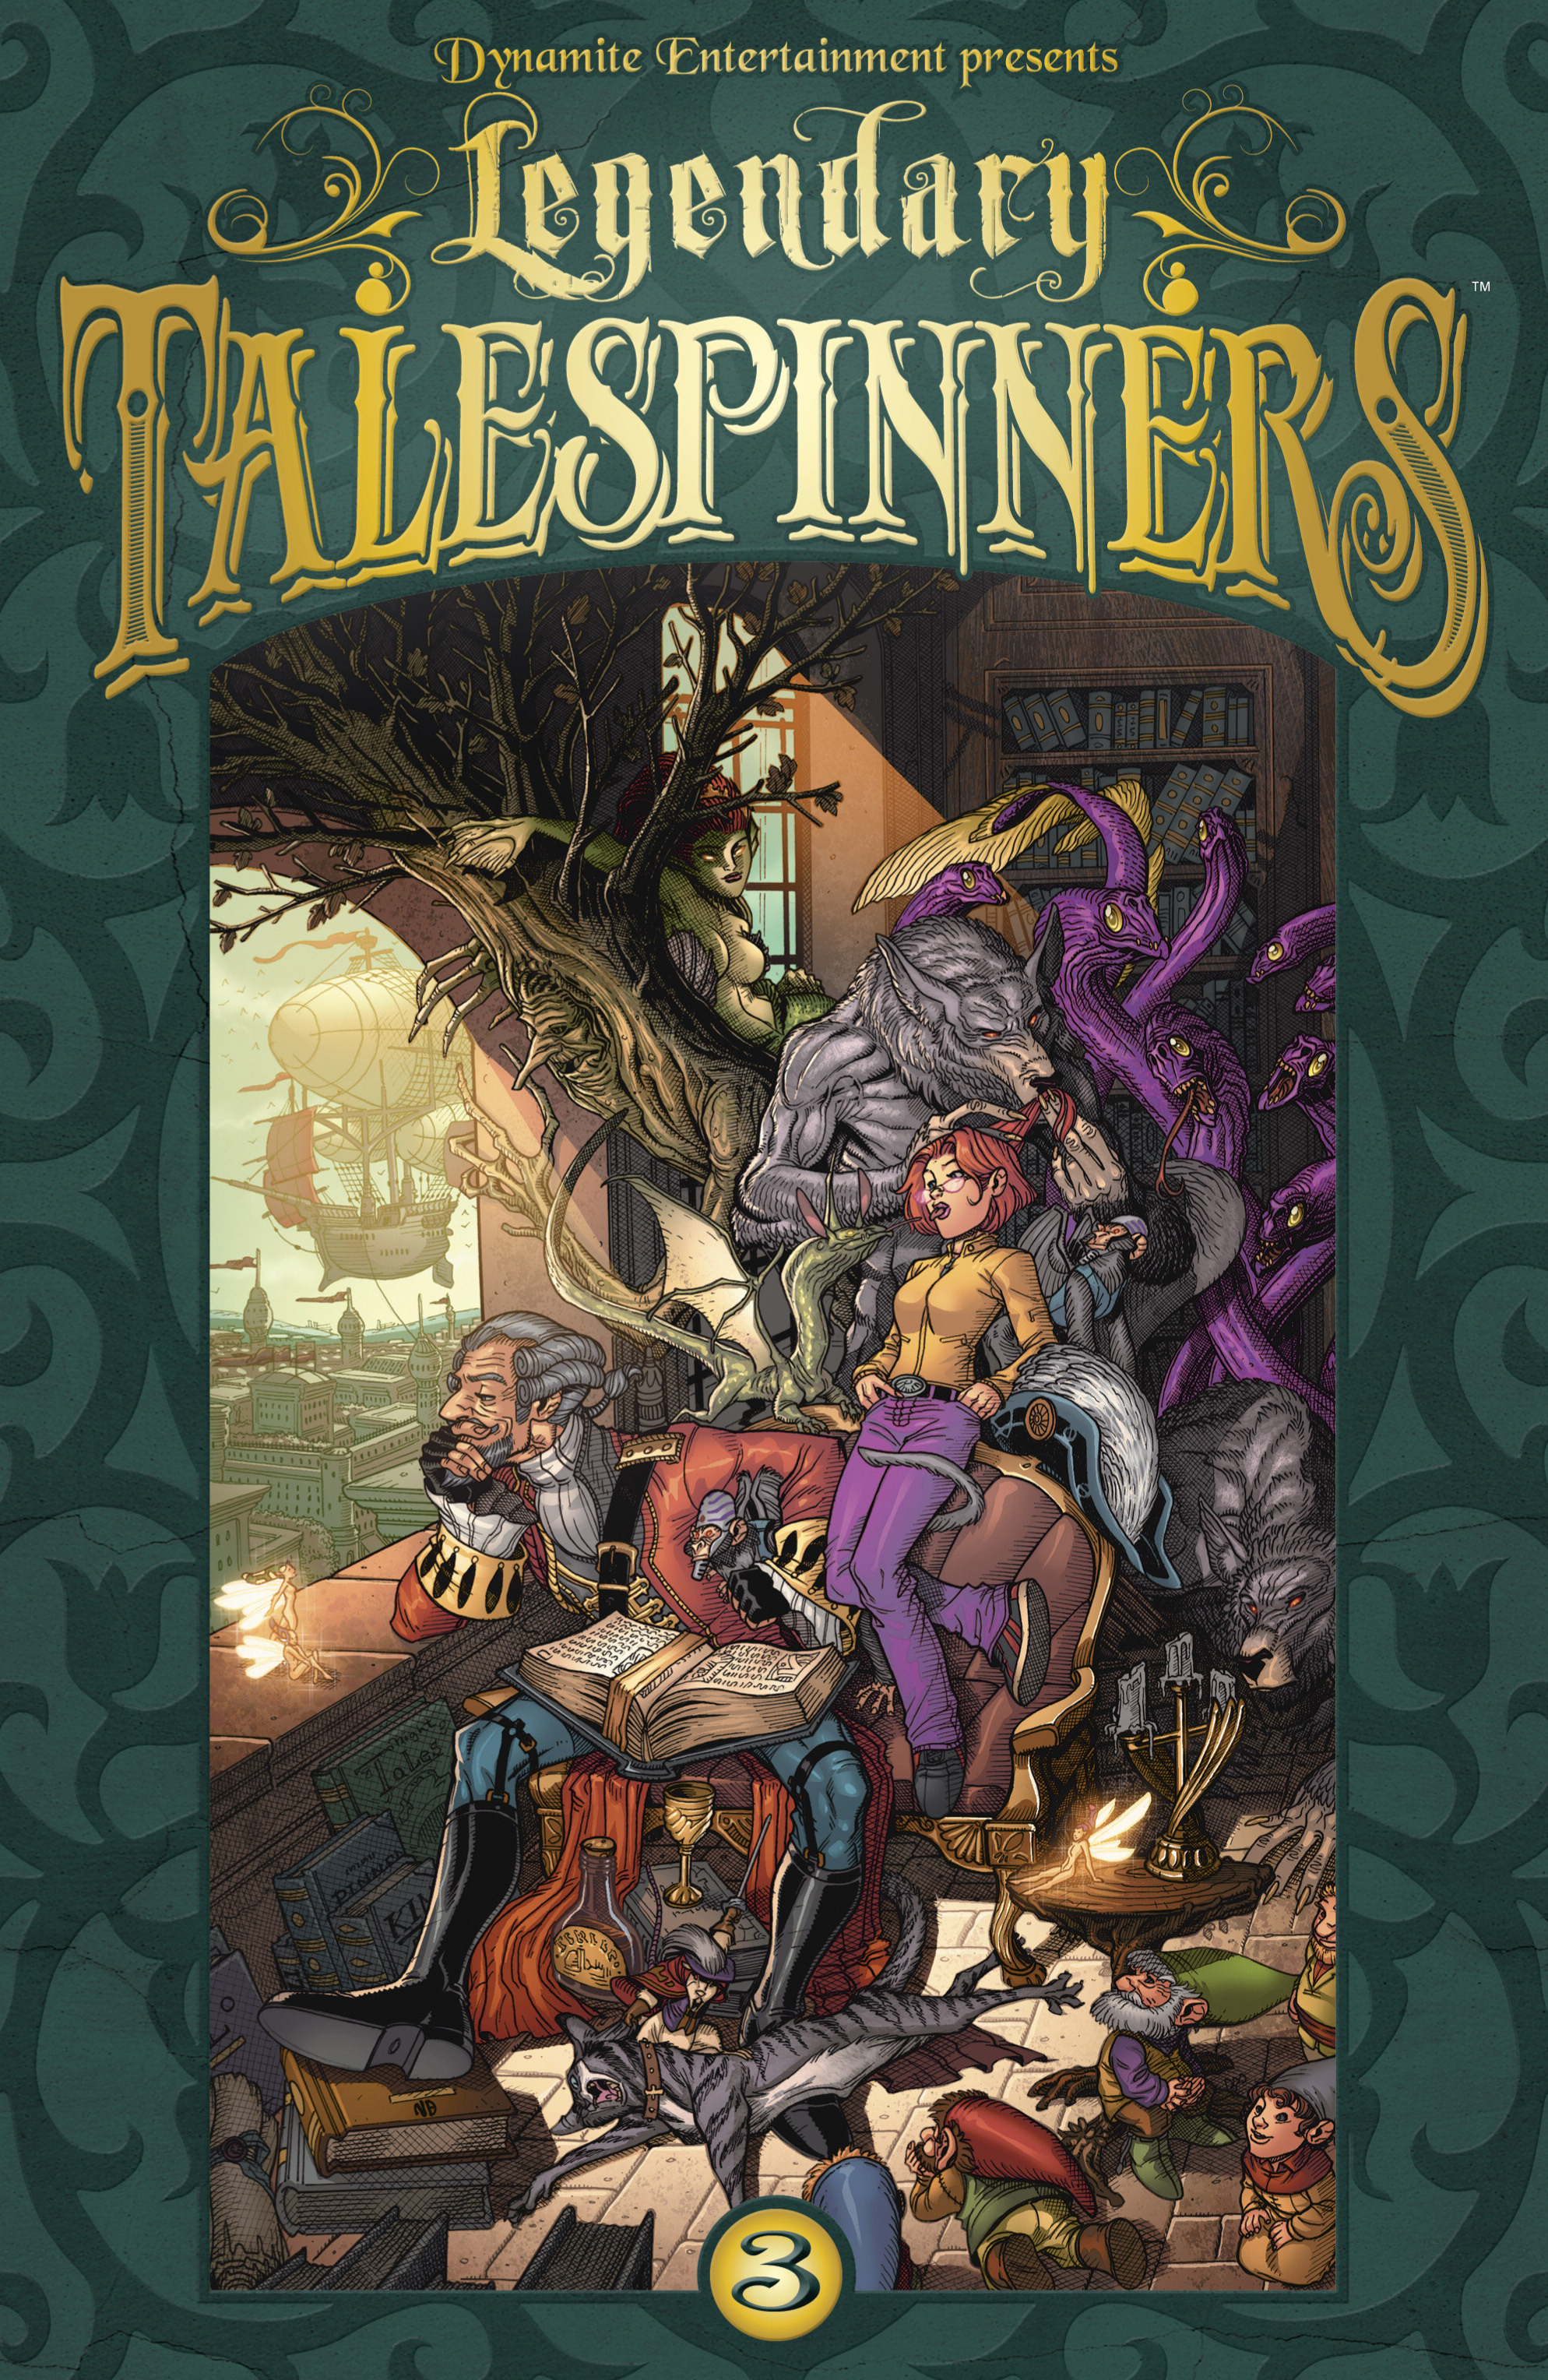 Read online Legendary Talespinners comic -  Issue #3 - 1